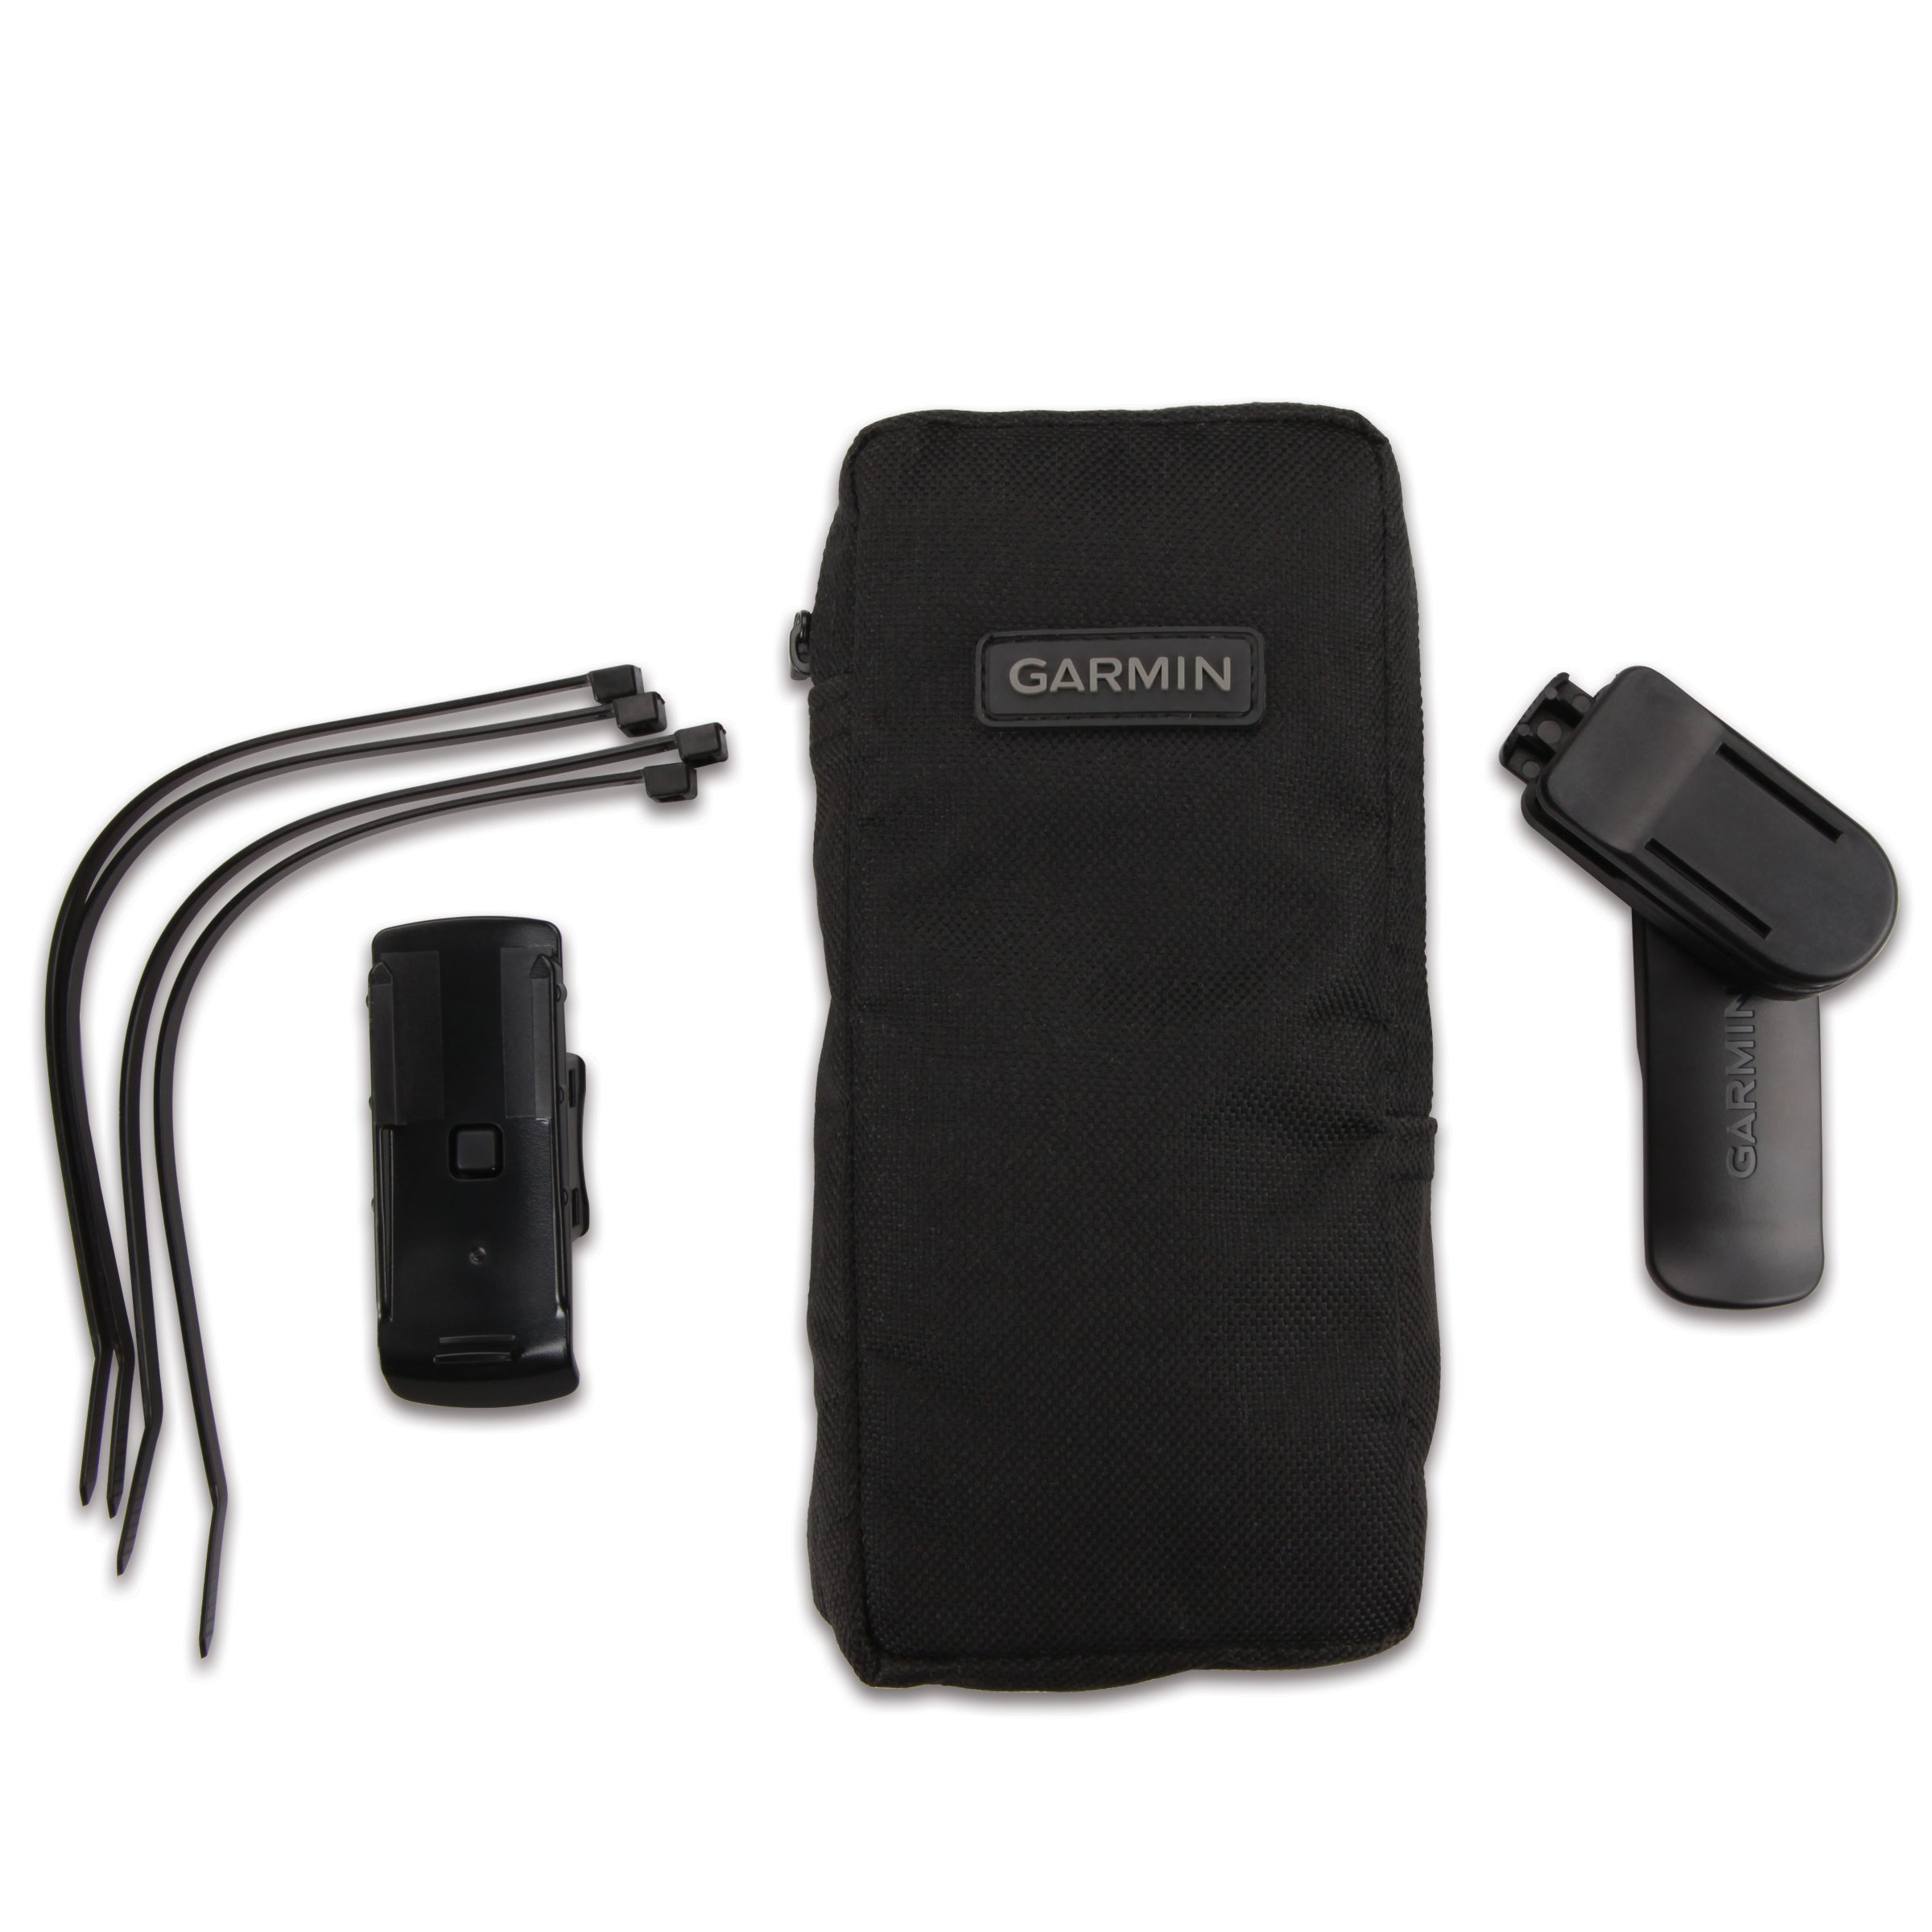 Garmin Case with zipper and mounting kit with spine mount